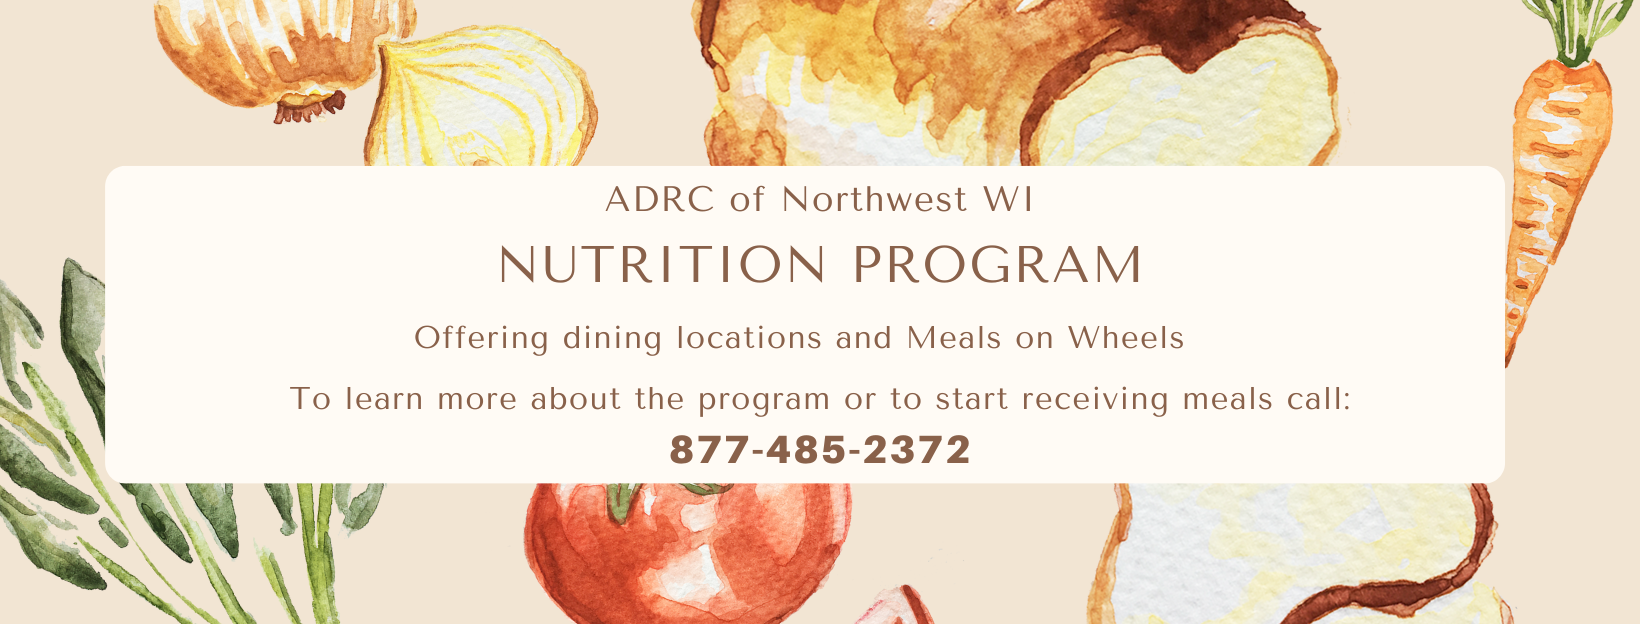 Image links to nutrition program page